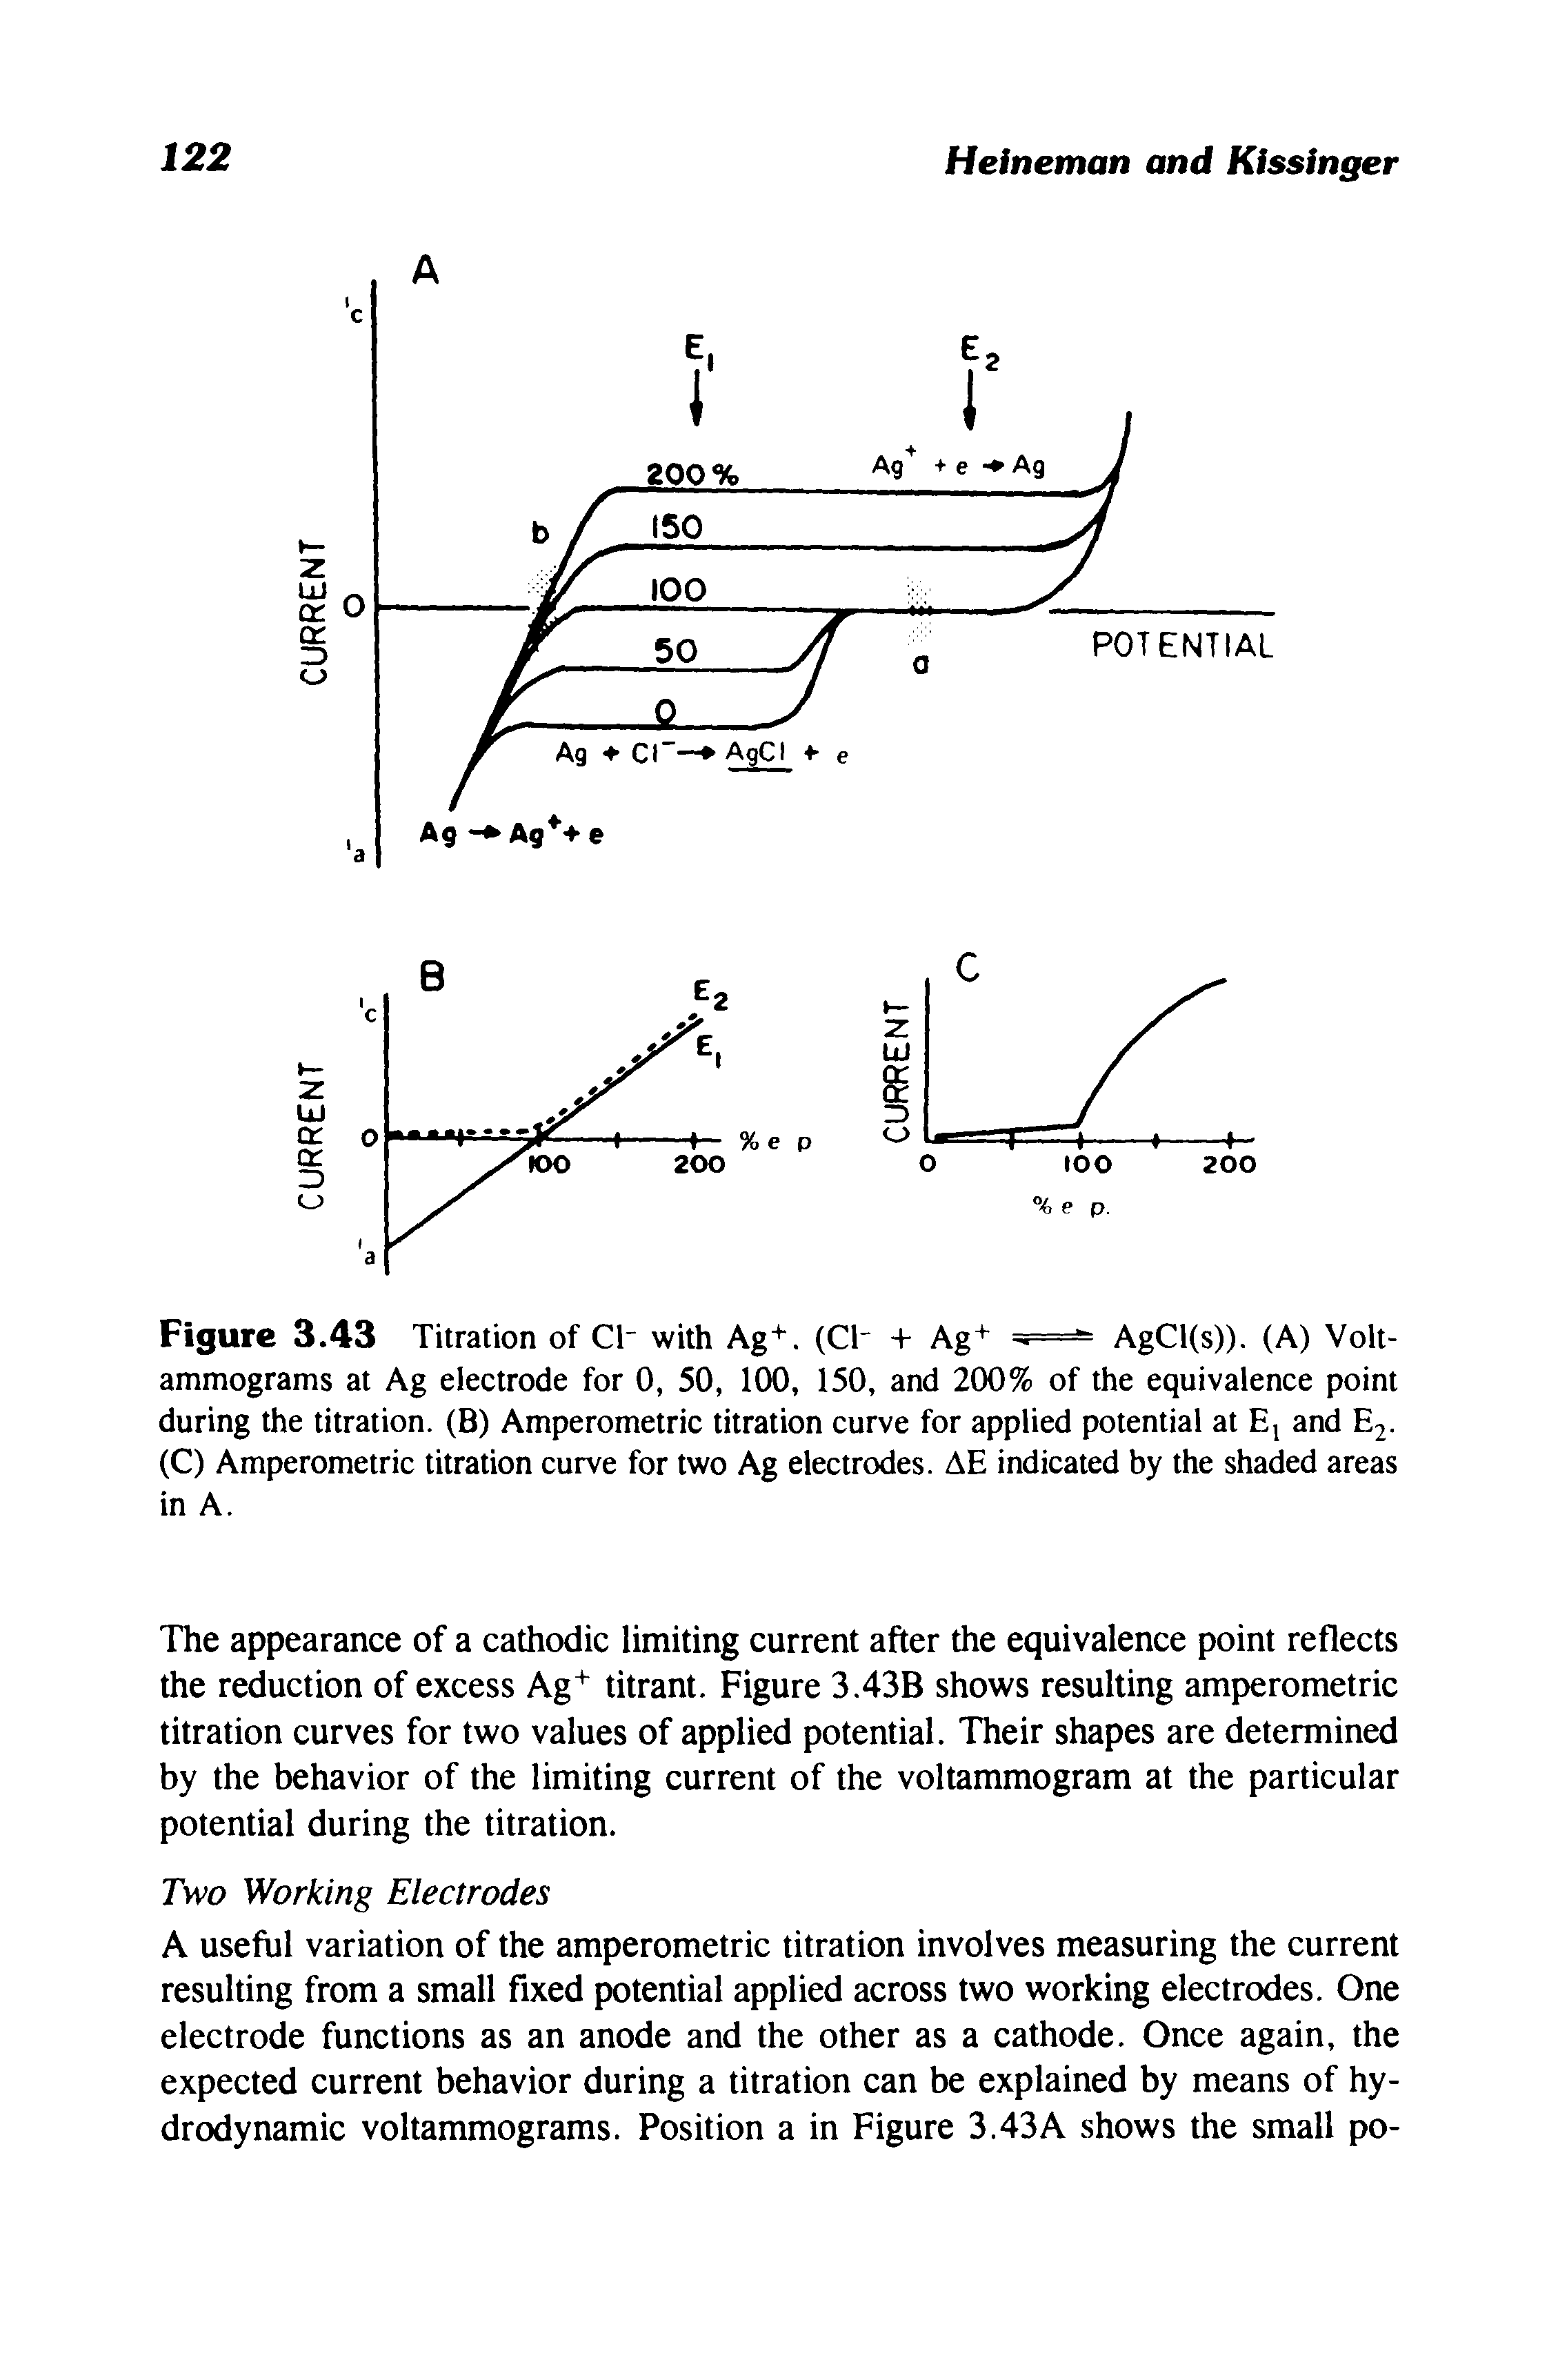 Figure 3.43 Titration of Cl- with Ag+. (CF + Ag+ =5= AgCl(s)). (A) Volt-ammograms at Ag electrode for 0, 50, 100, 150, and 200% of the equivalence point during the titration. (B) Amperometric titration curve for applied potential at Ej and E2. (C) Amperometric titration curve for two Ag electrodes. AE indicated by the shaded areas in A.